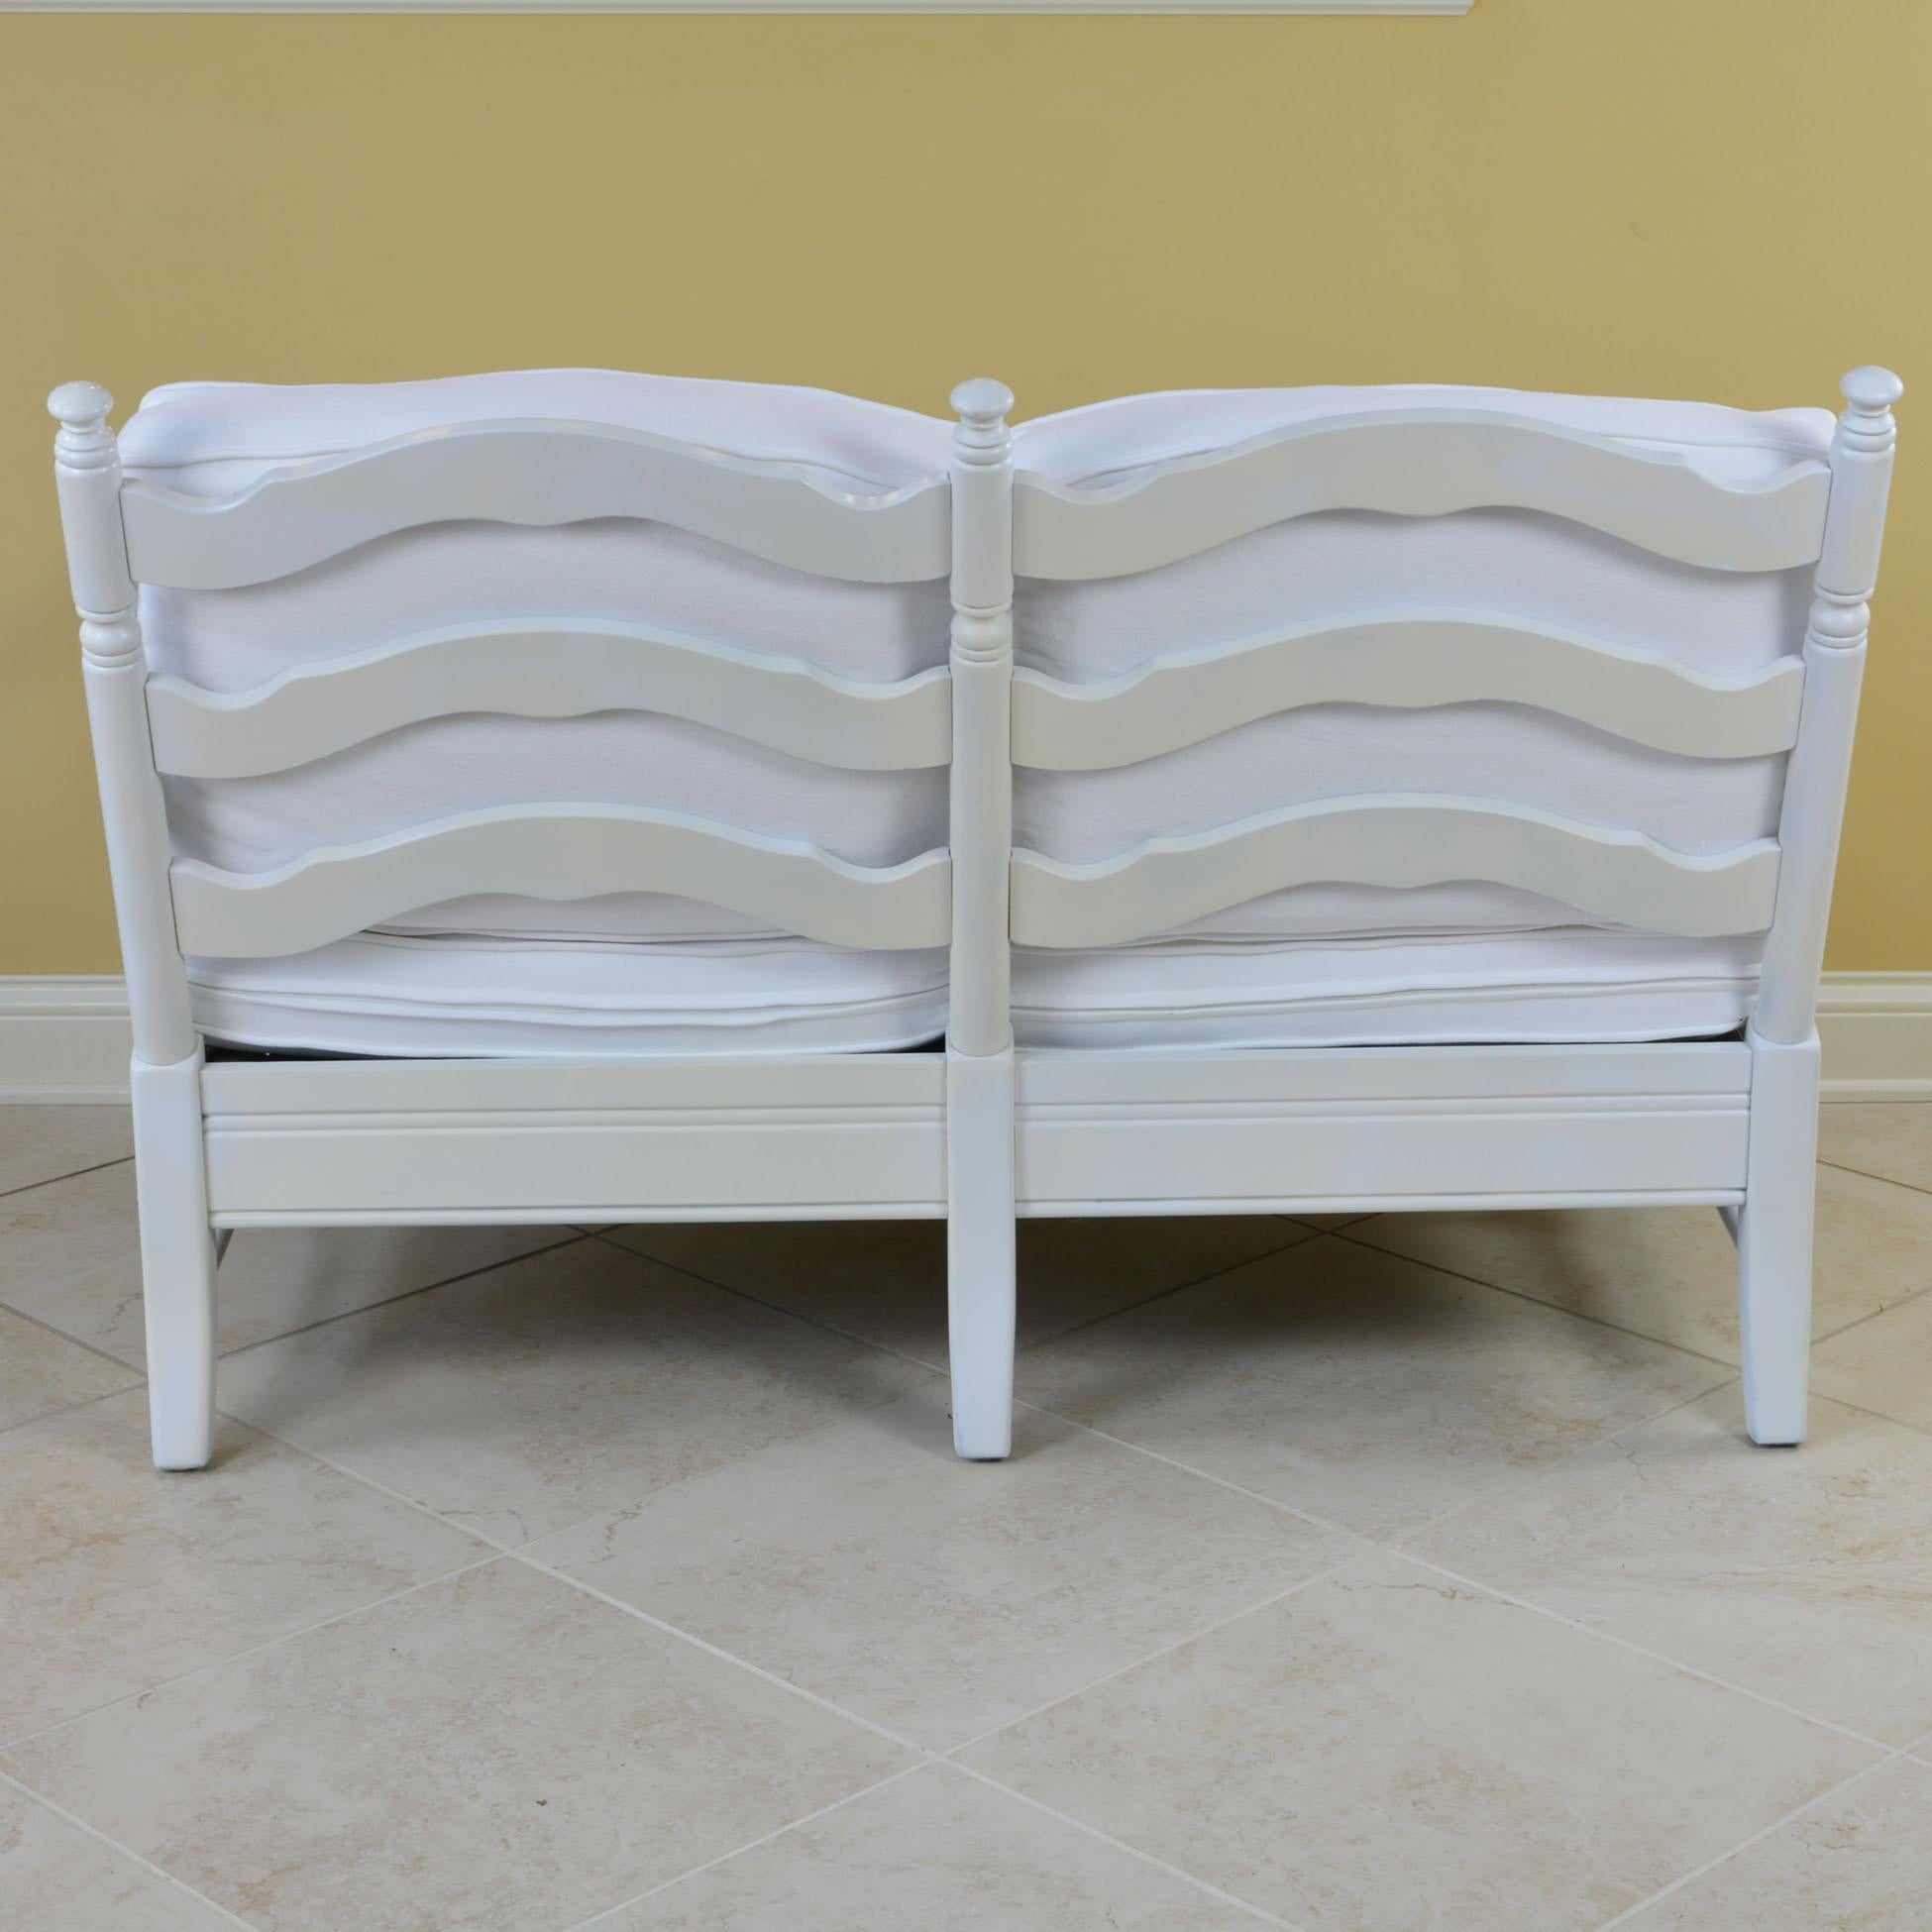 French Provincial Style 2 Person White Settee In Fair Condition For Sale In Pataskala, OH